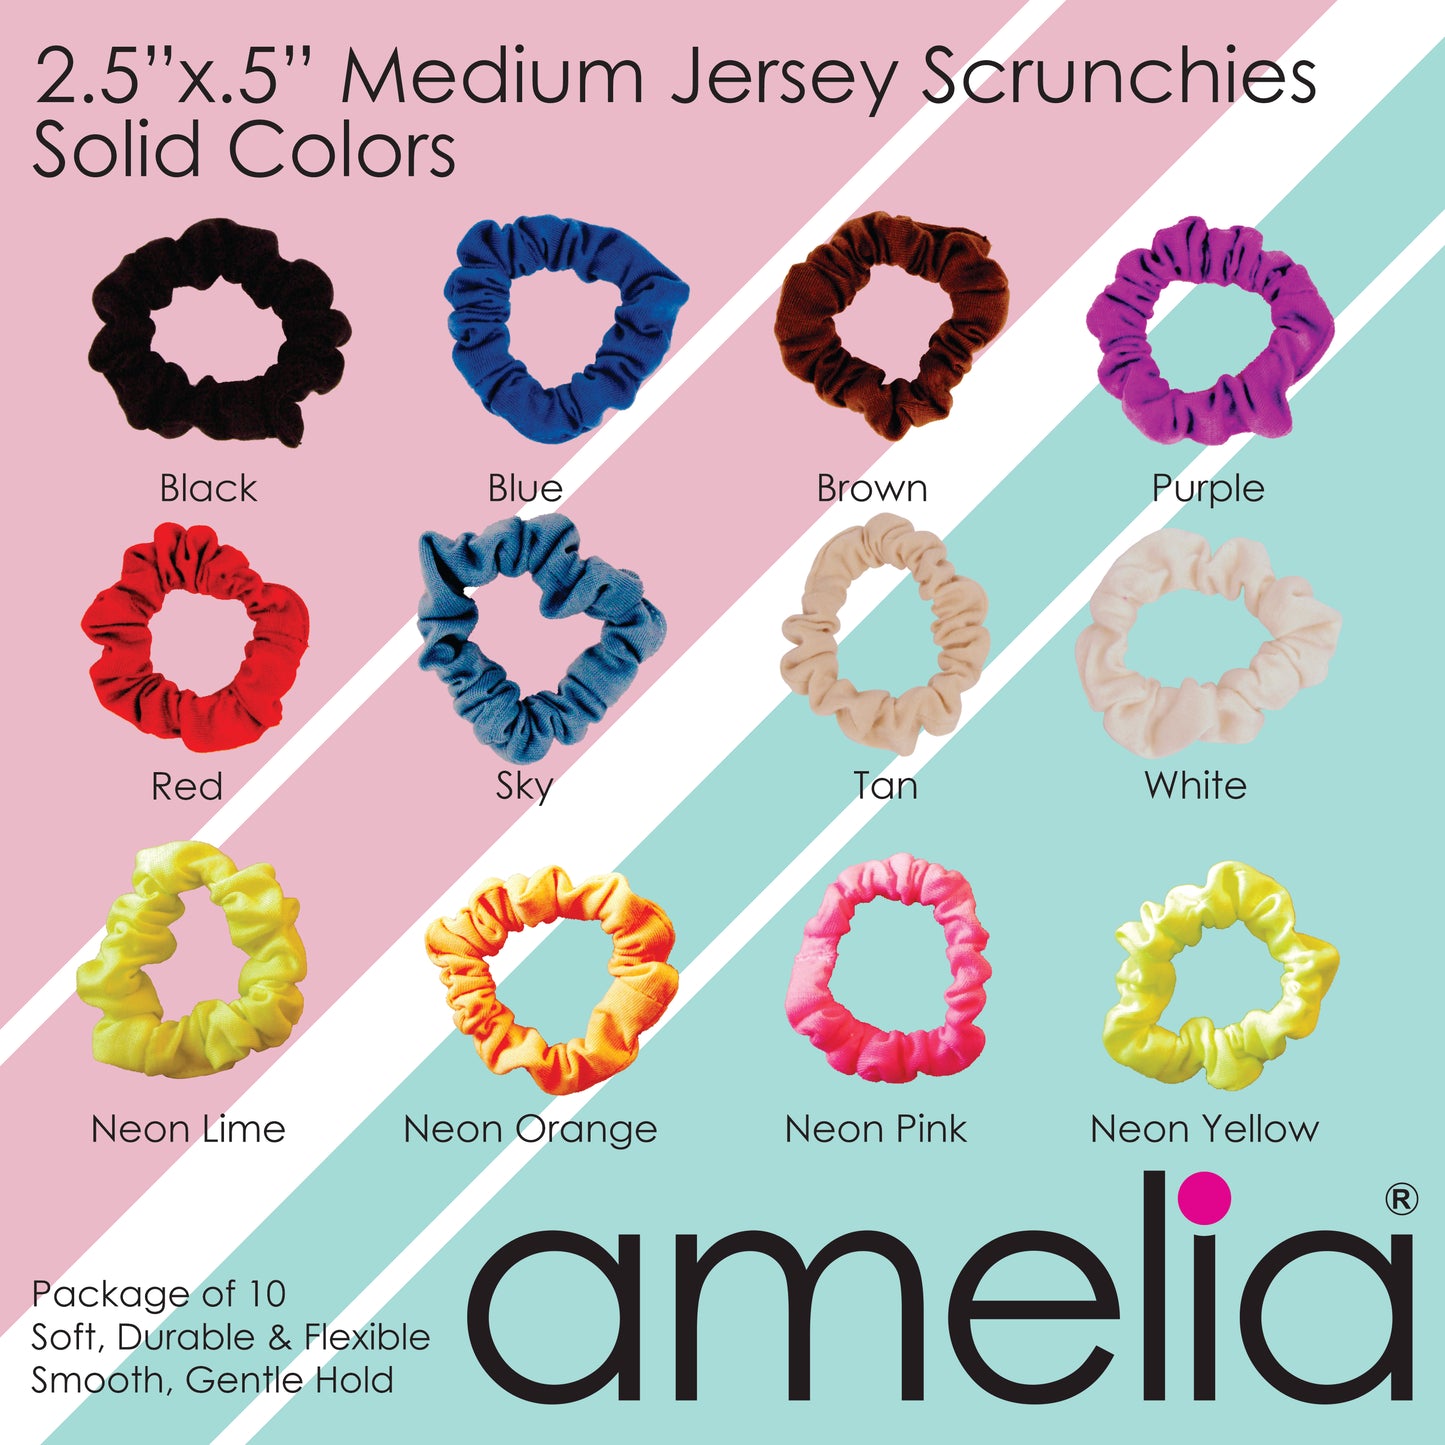 Amelia Beauty, Medium Neon Yellow Jersey Scrunchies, 2.5in Diameter, Gentle on Hair, Strong Hold, No Snag, No Dents or Creases. 10 Pack